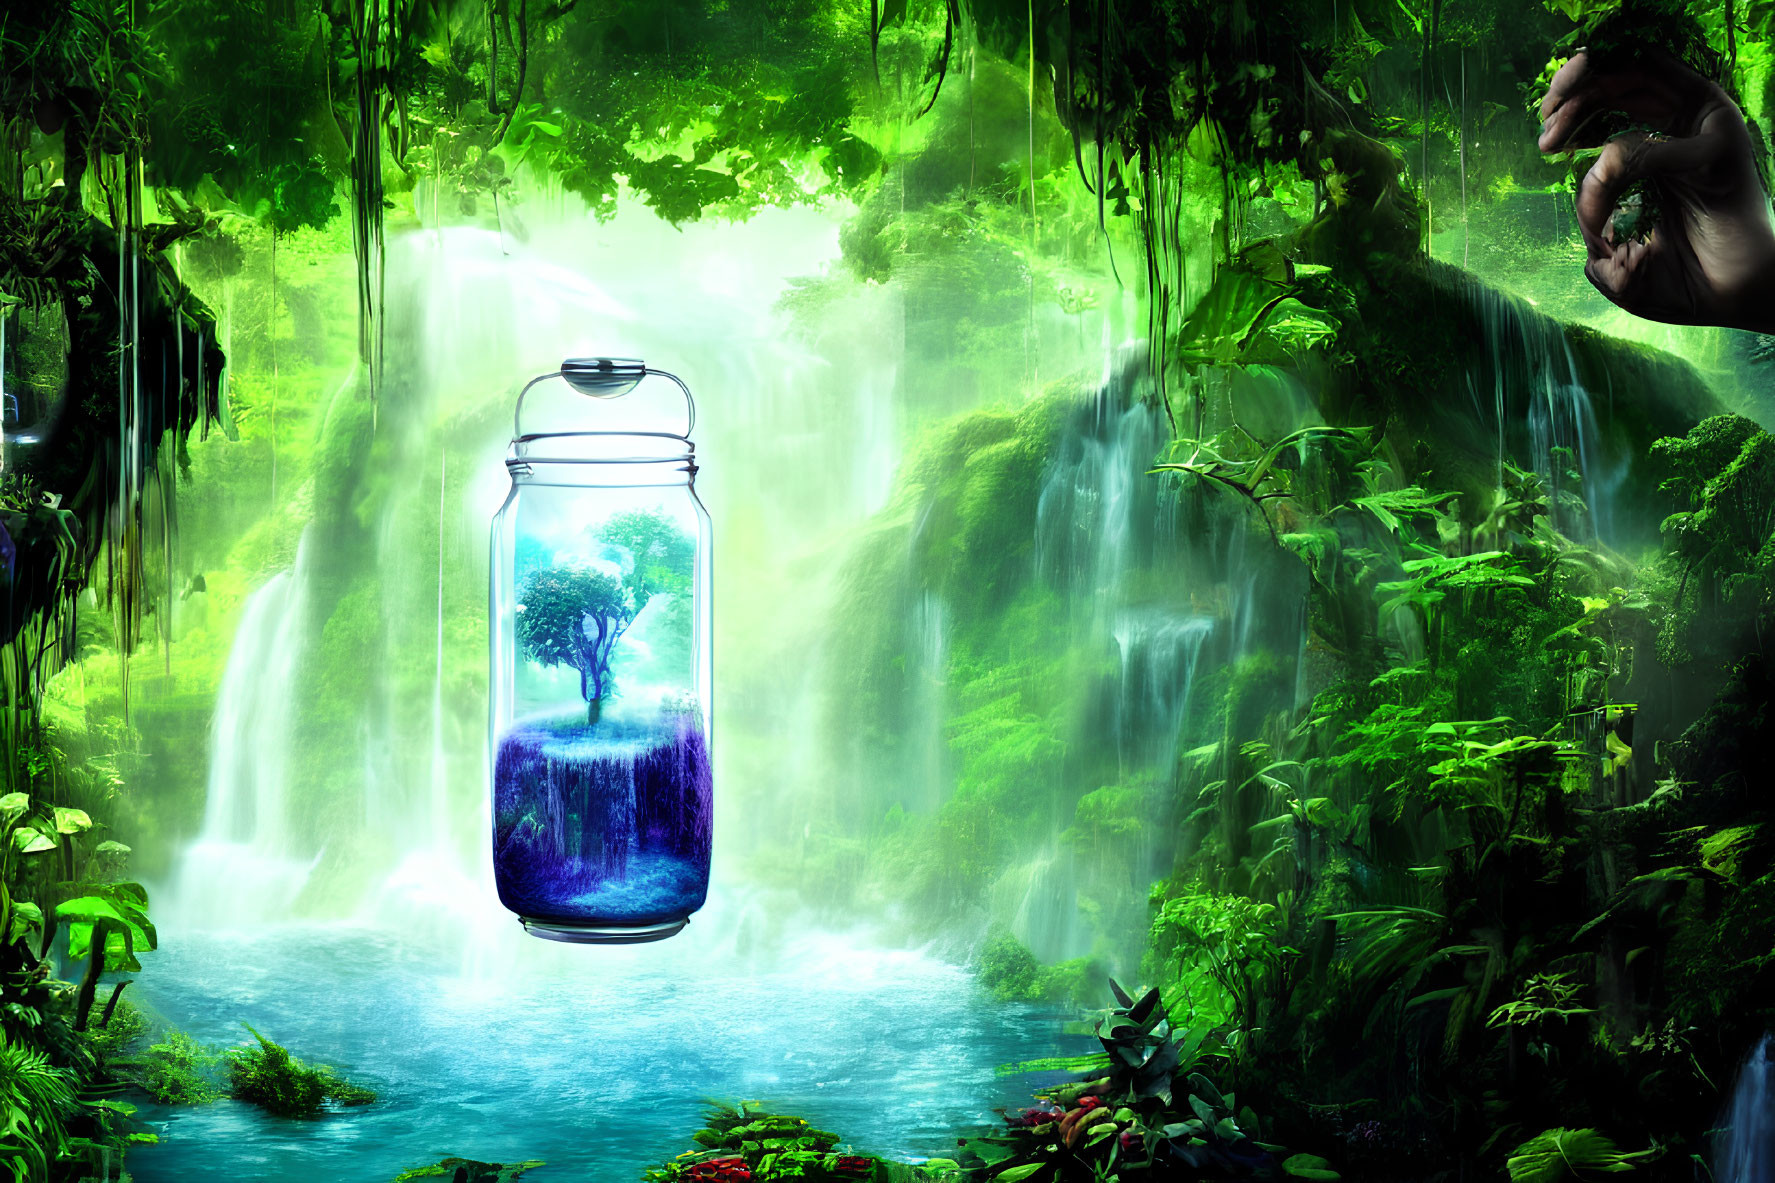 Surreal image: tree in jar, vibrant background, mysterious hand